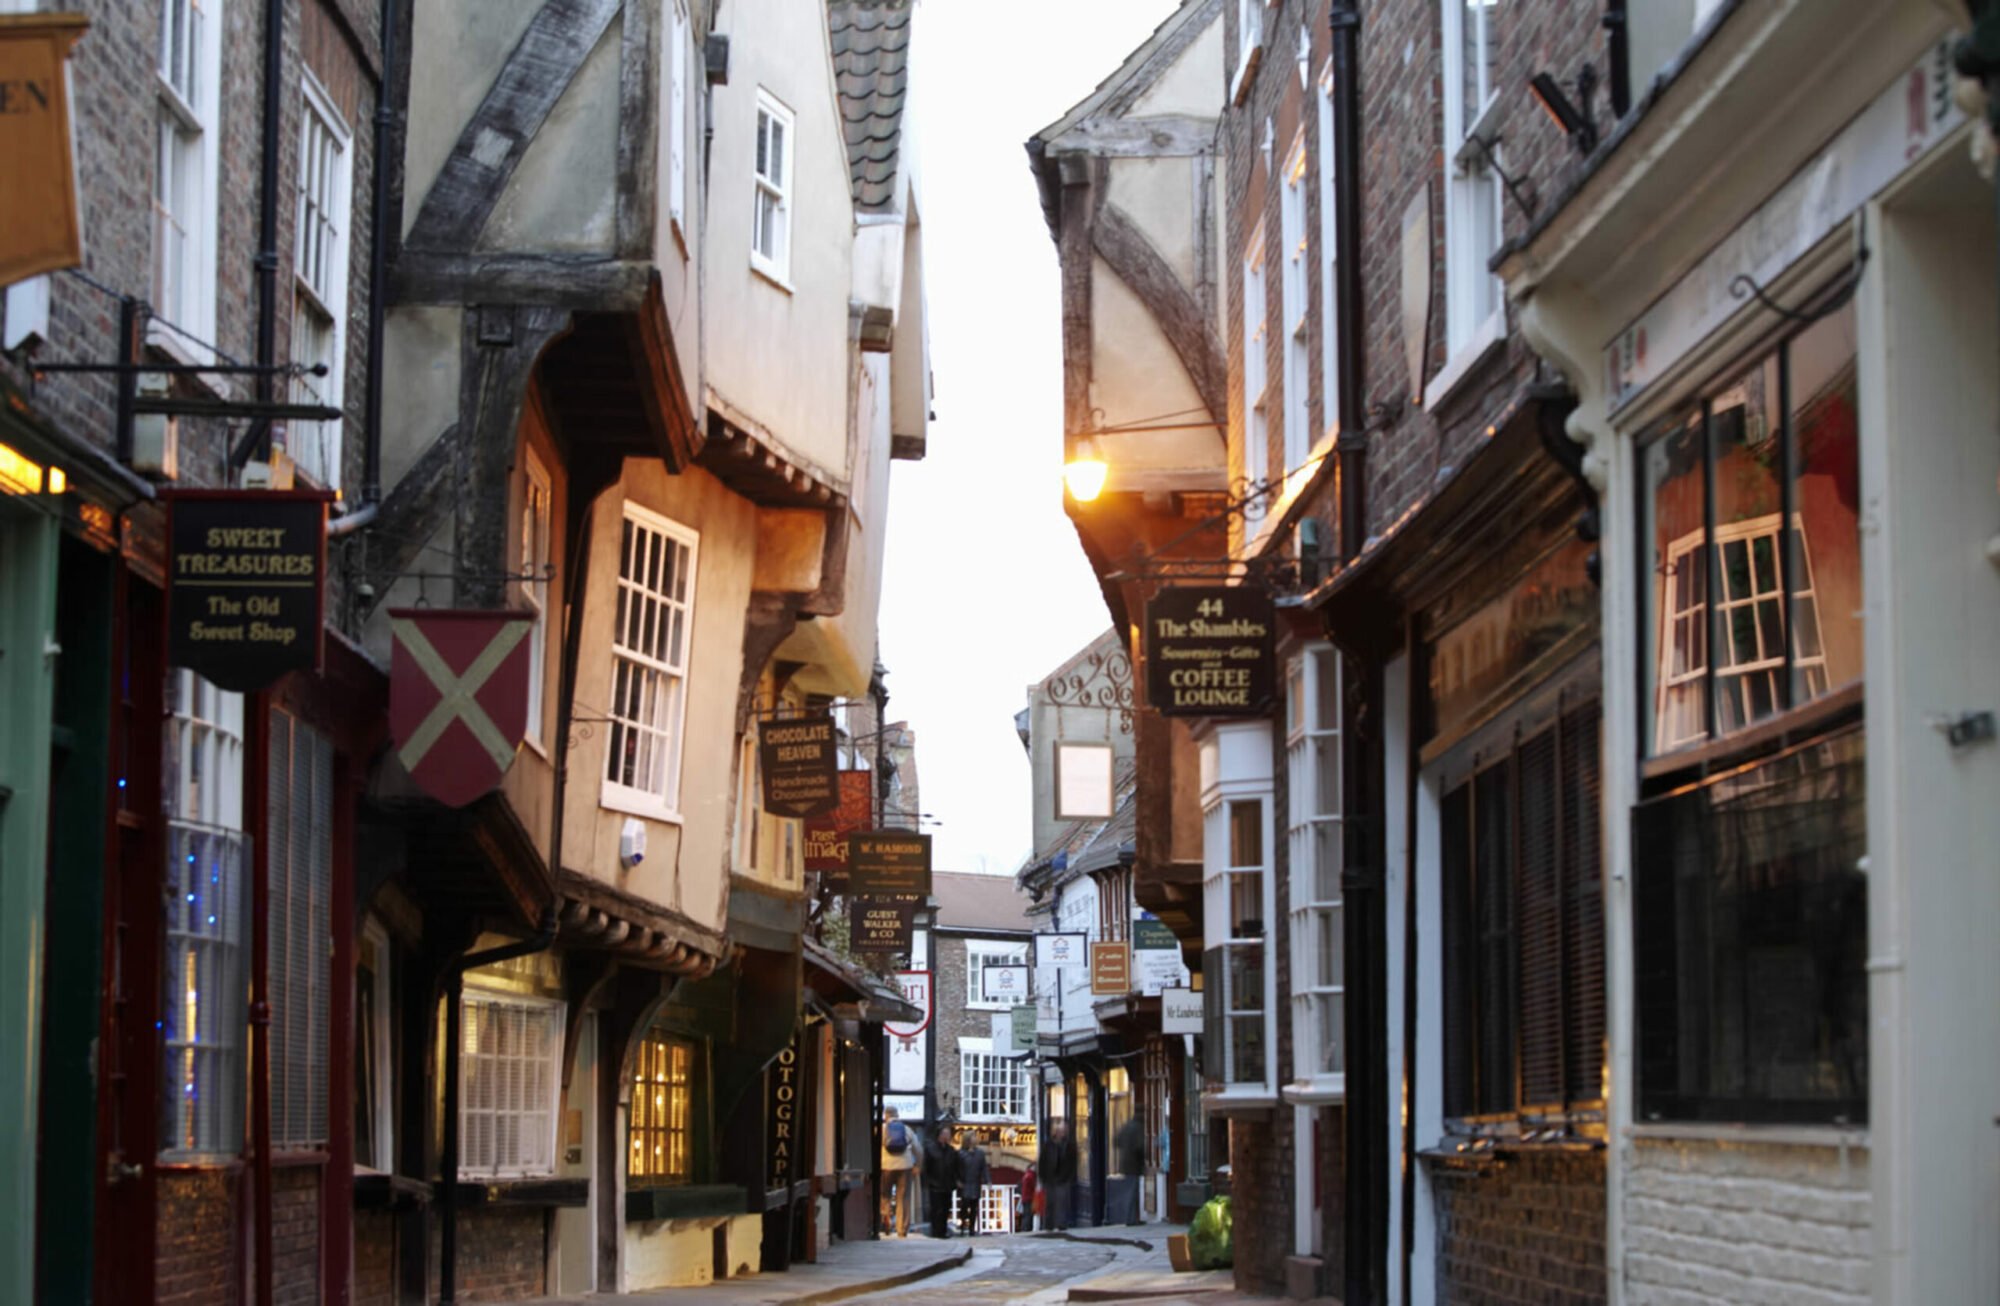 Image name york shambles scaled the 12 image from the post York in Yorkshire.com.